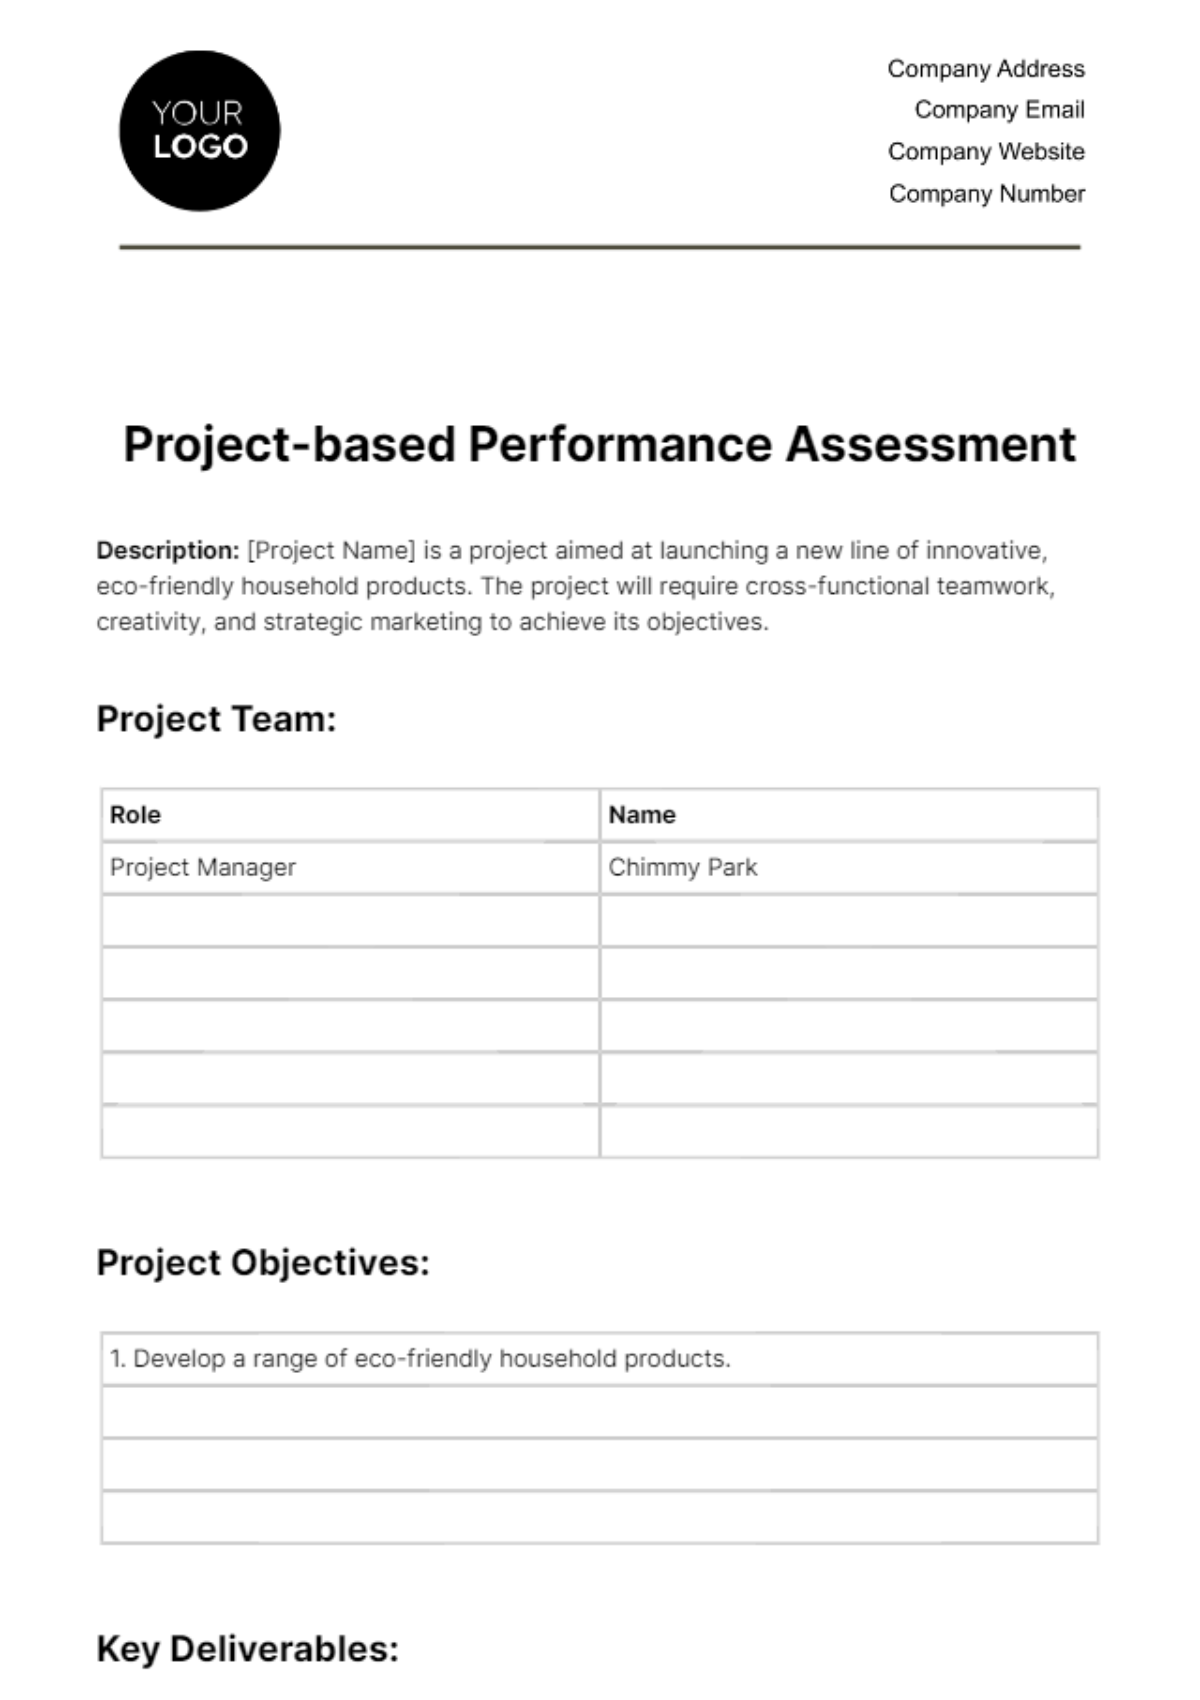 Free Project-based Performance Assessment HR Template